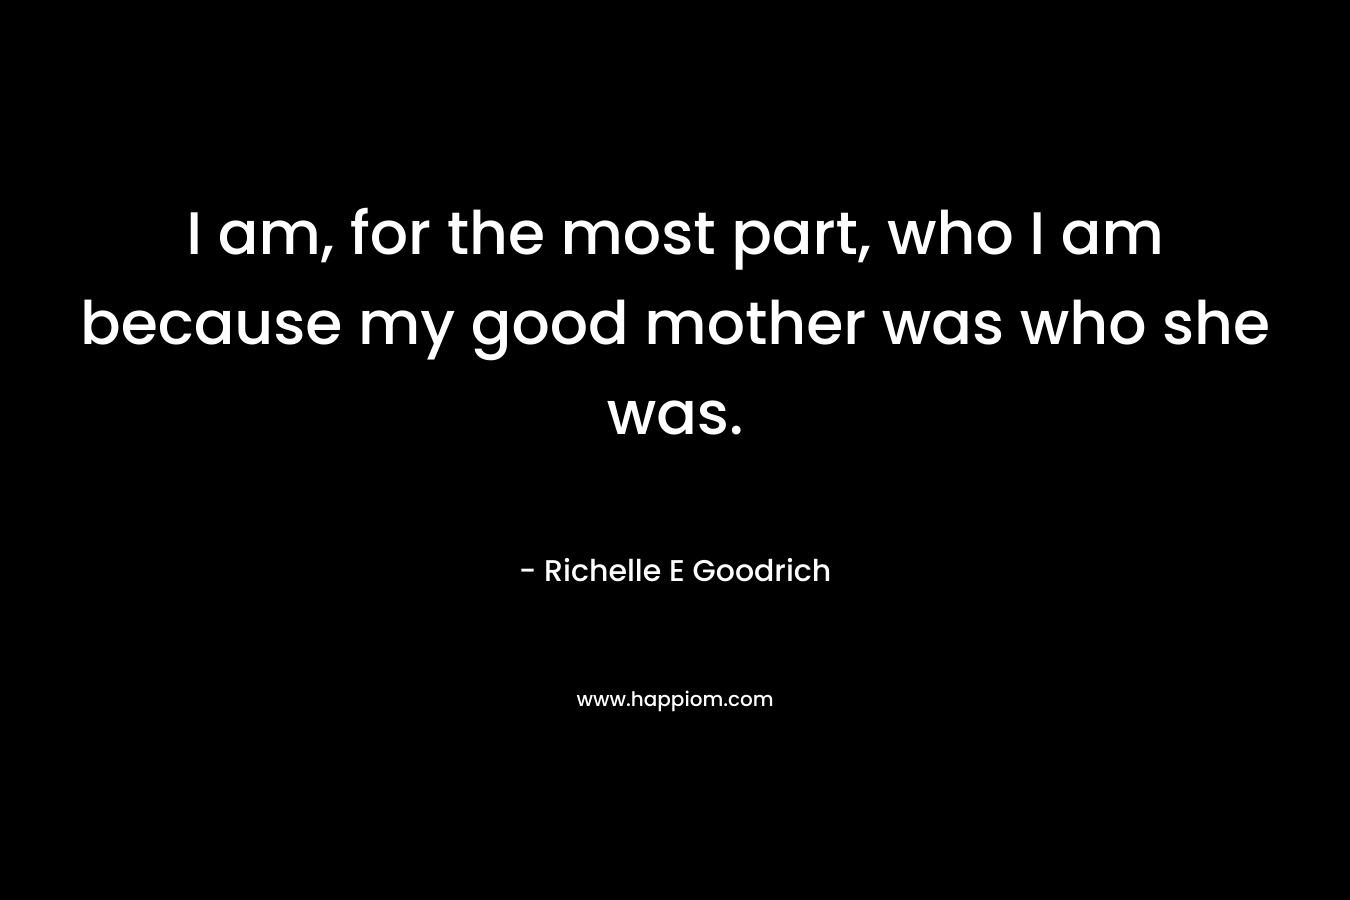 I am, for the most part, who I am because my good mother was who she was.